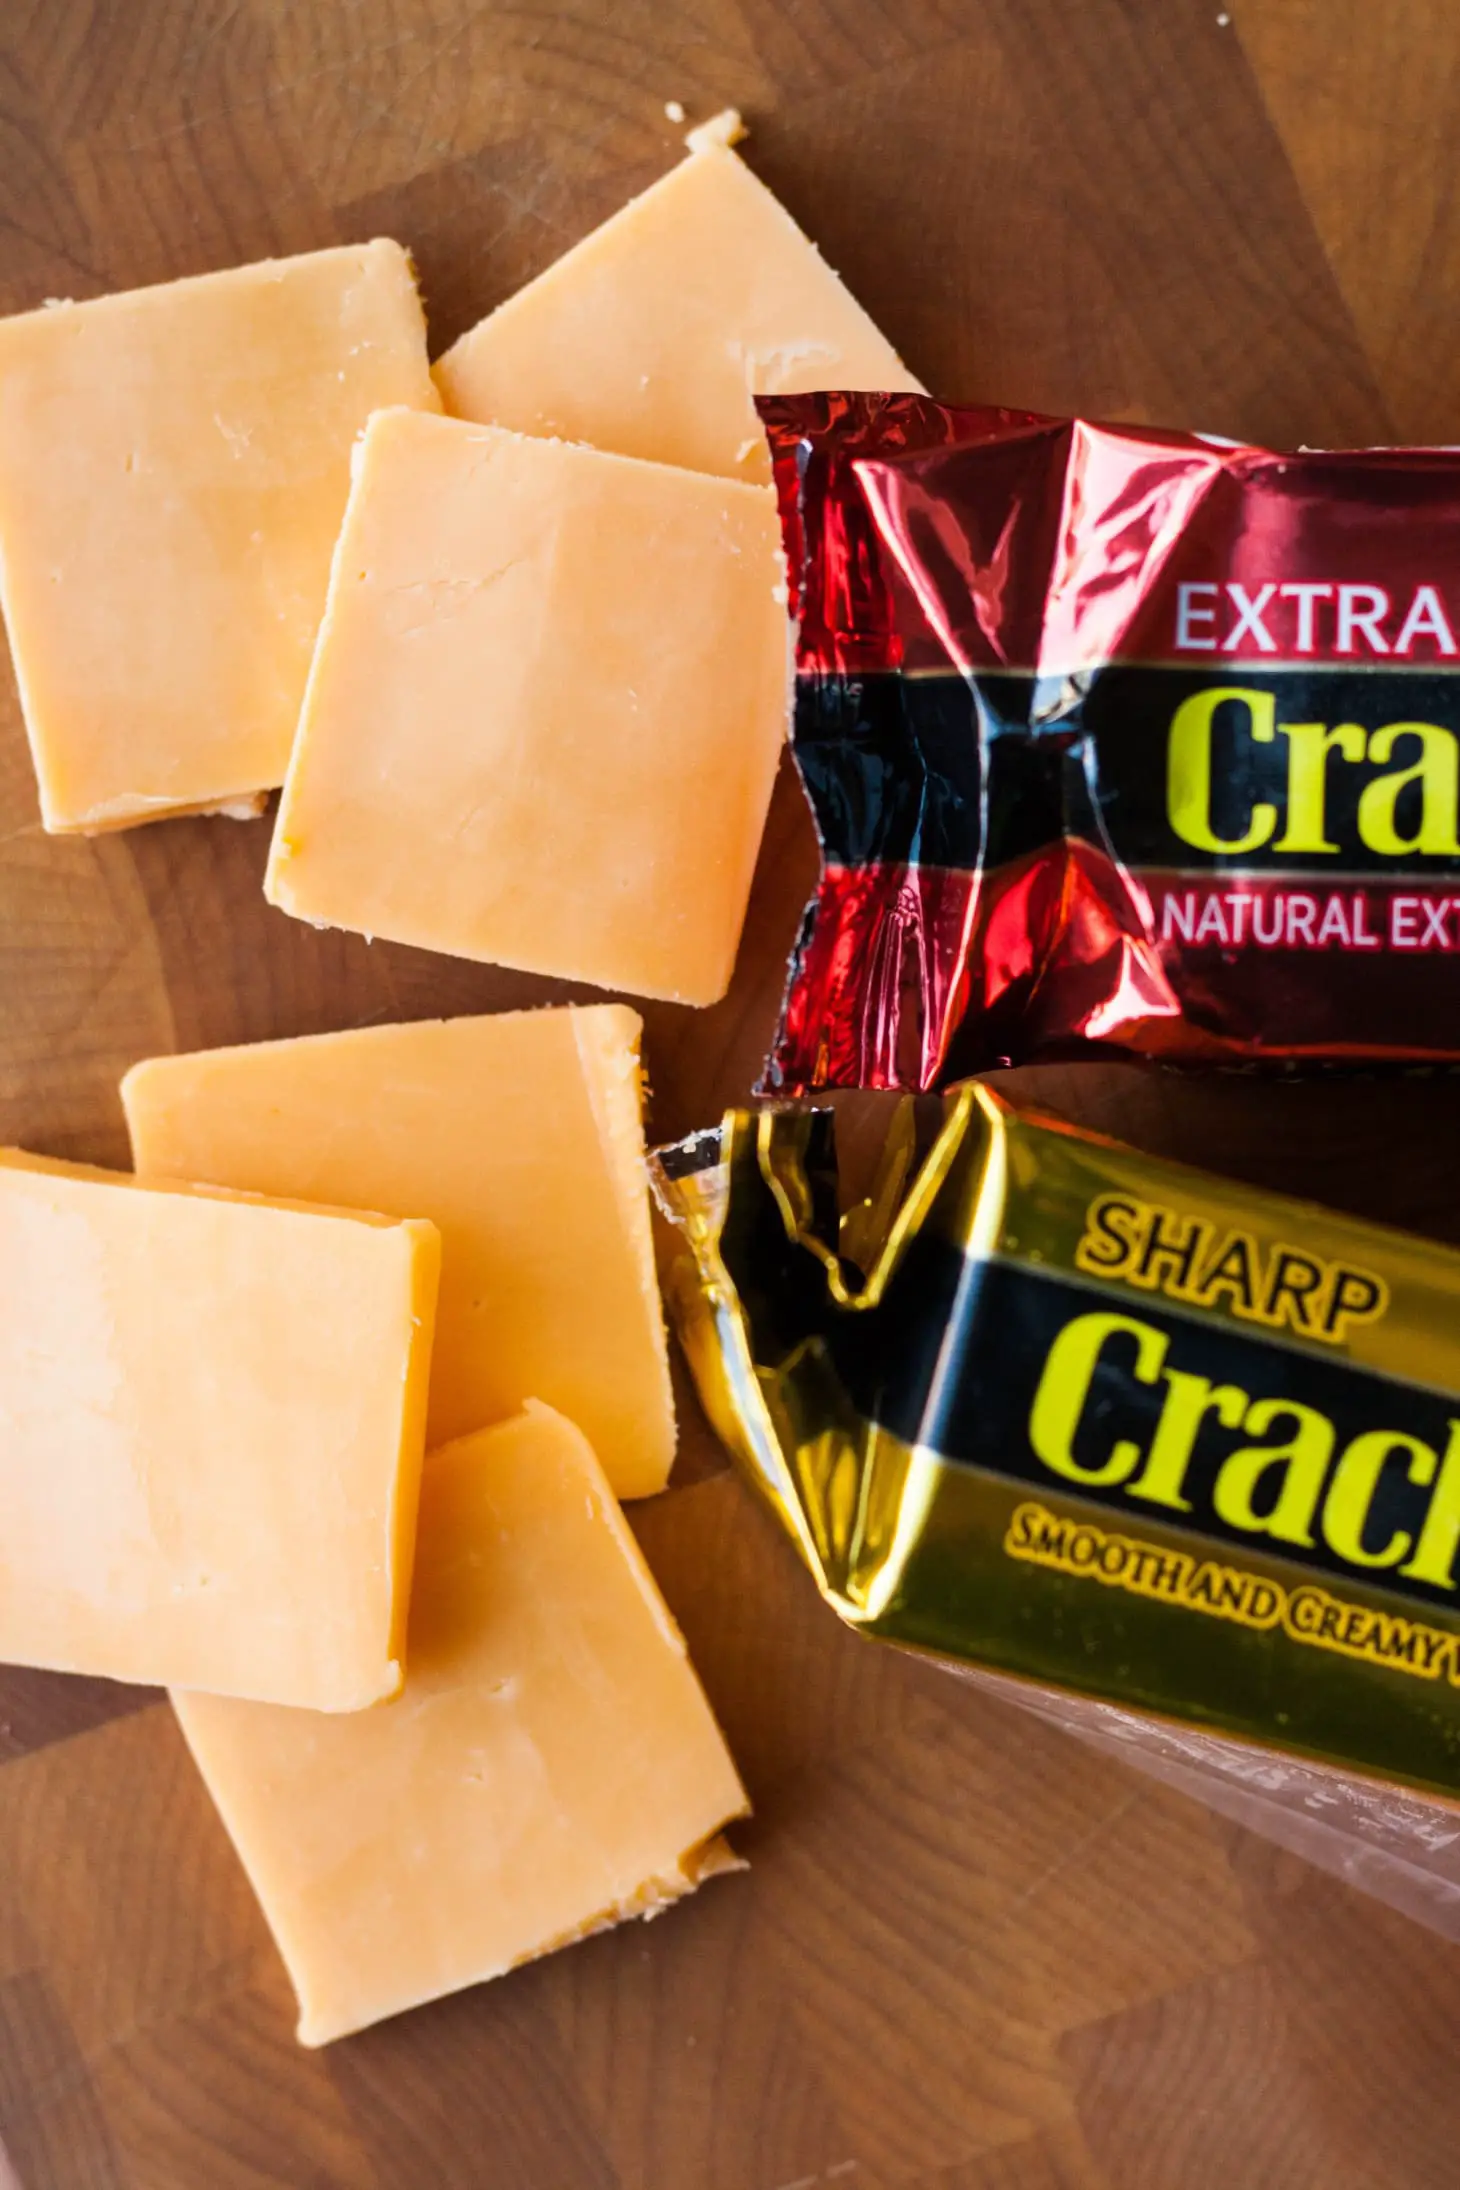 Whats the Deal with Sharp Cheddar Cheese?